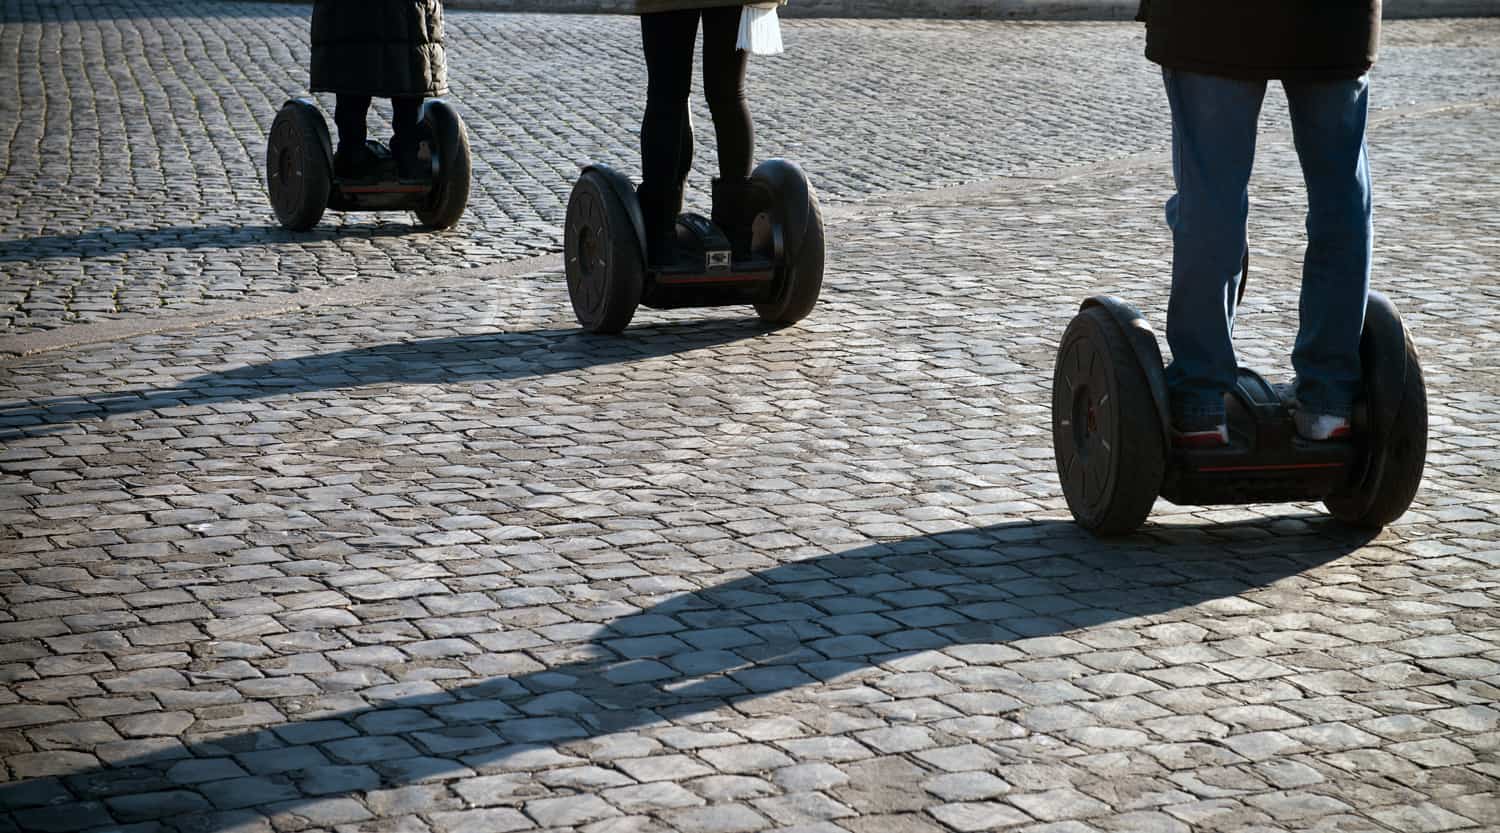 Human legs on the wheels in the street.